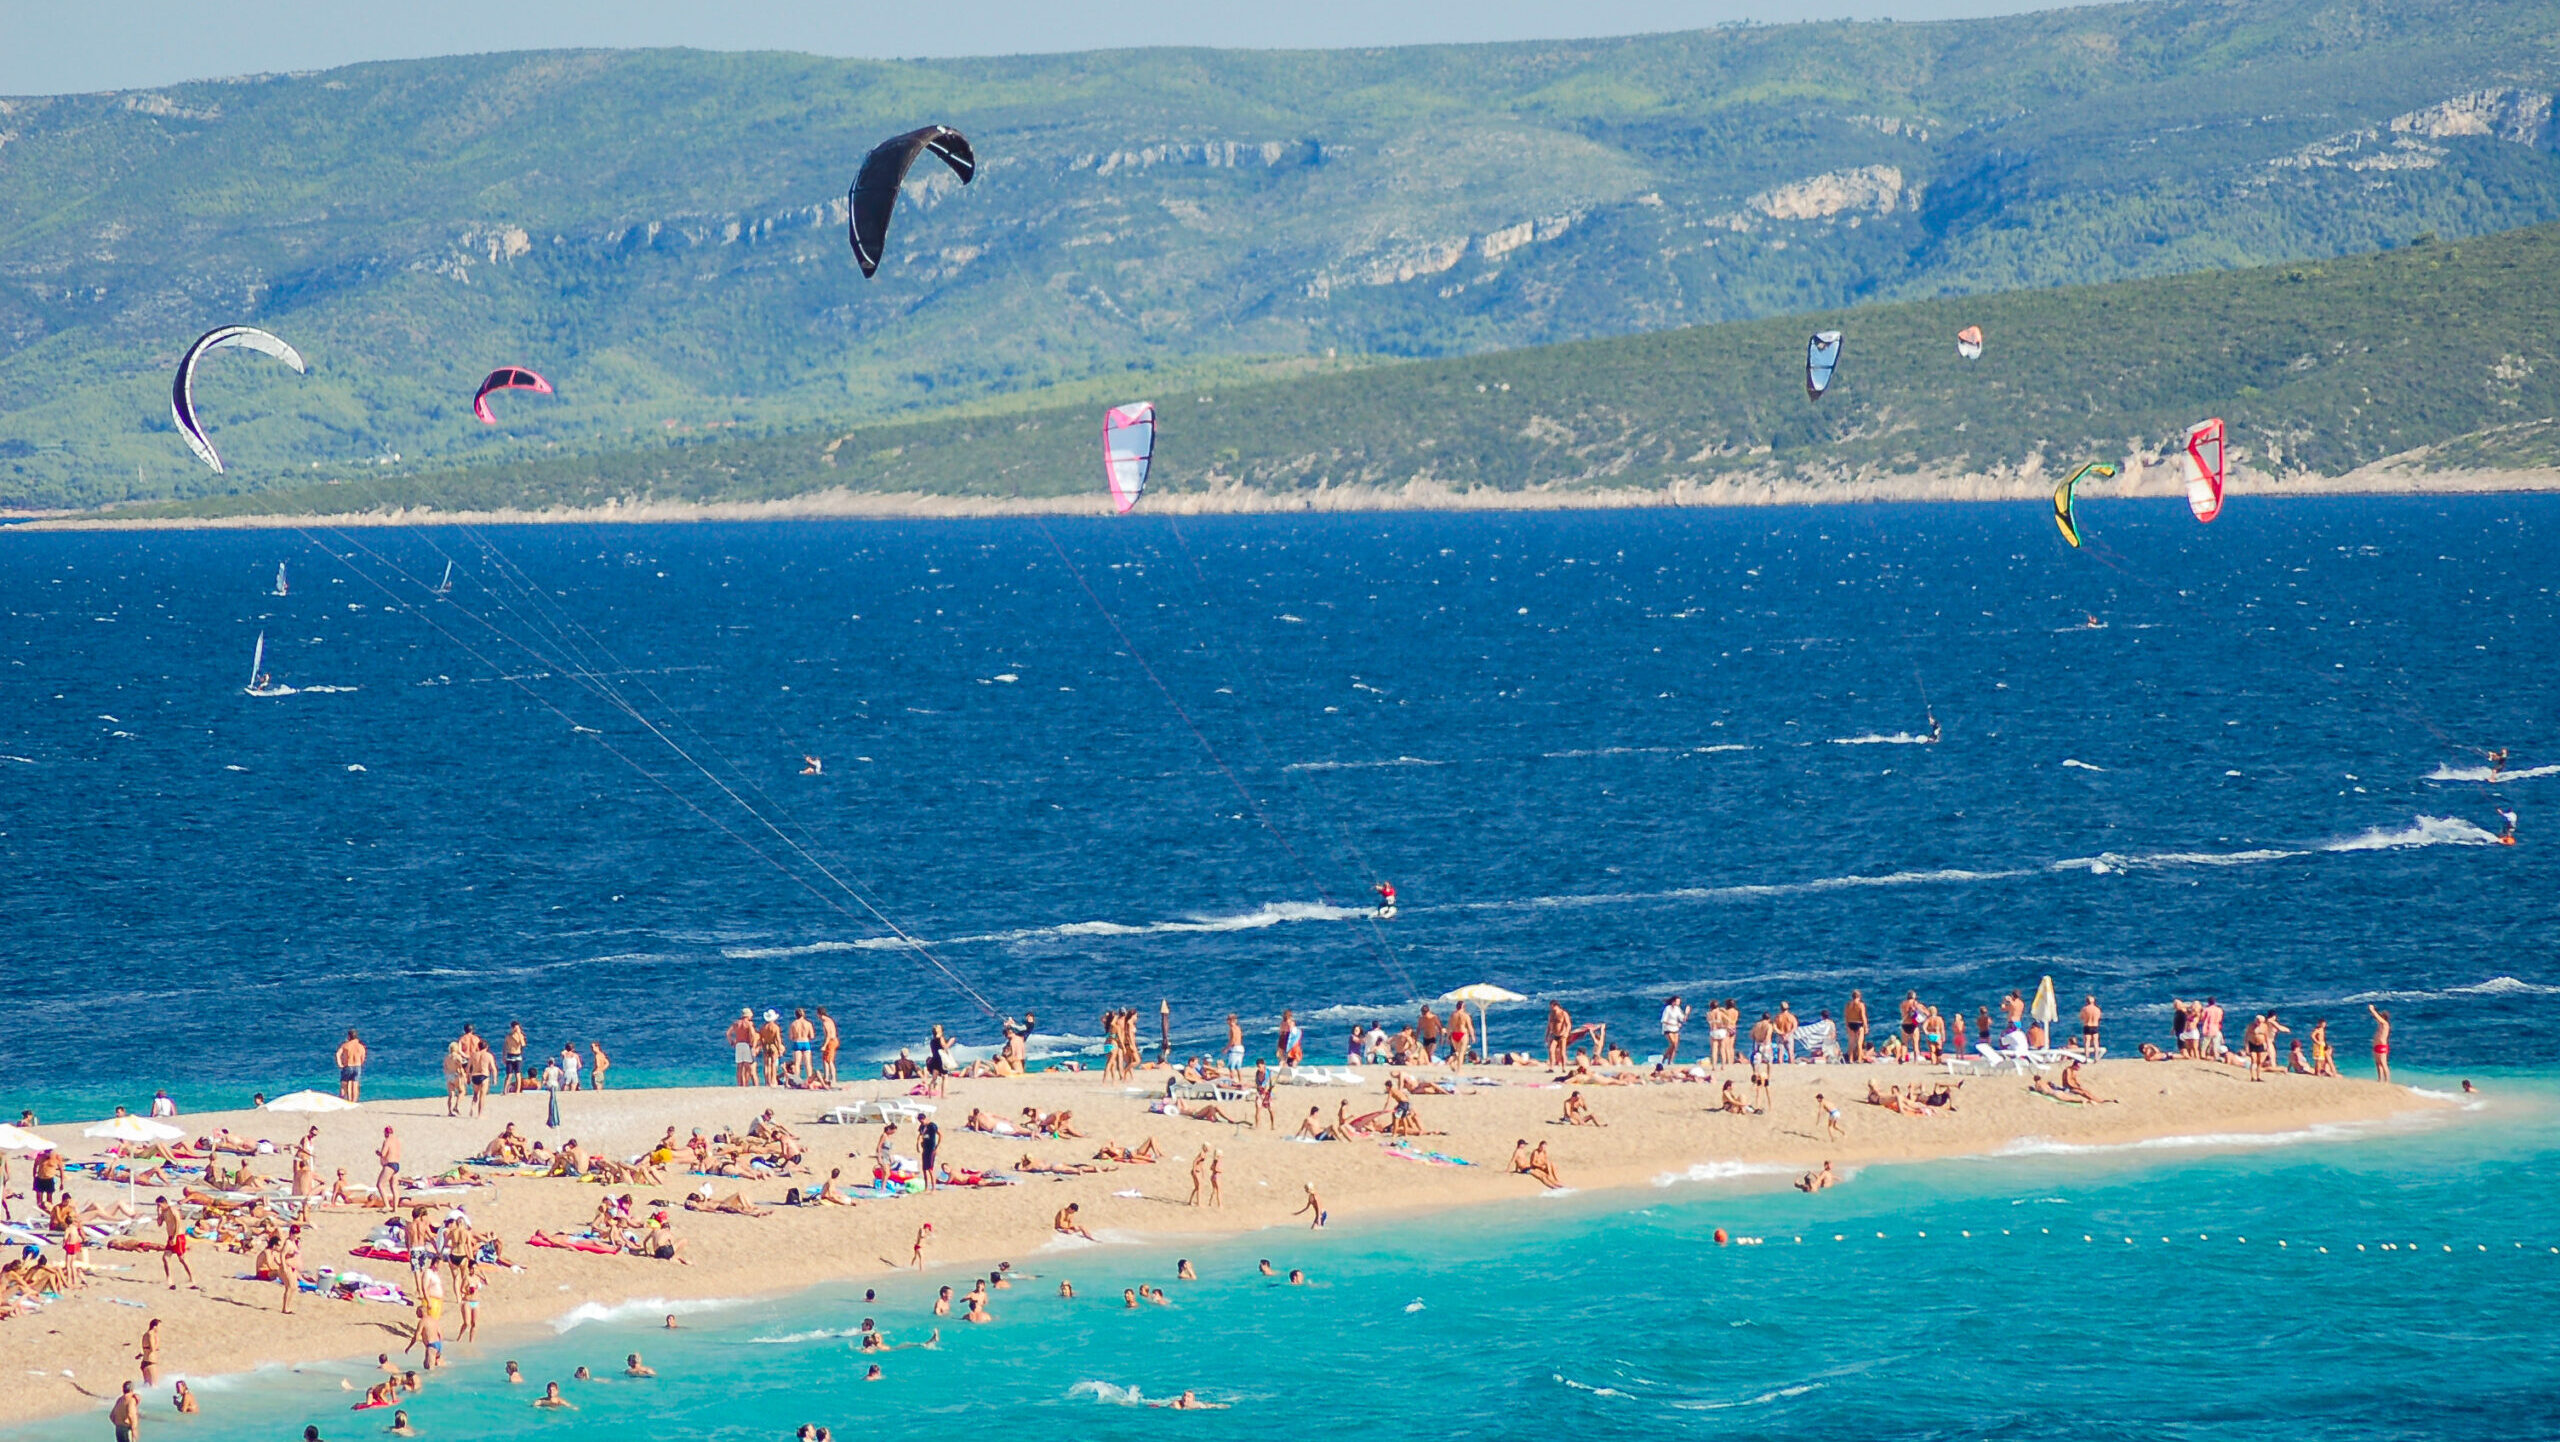 Brač Island beach with people swimming, sunbathing and flying with parachutes high in the sky